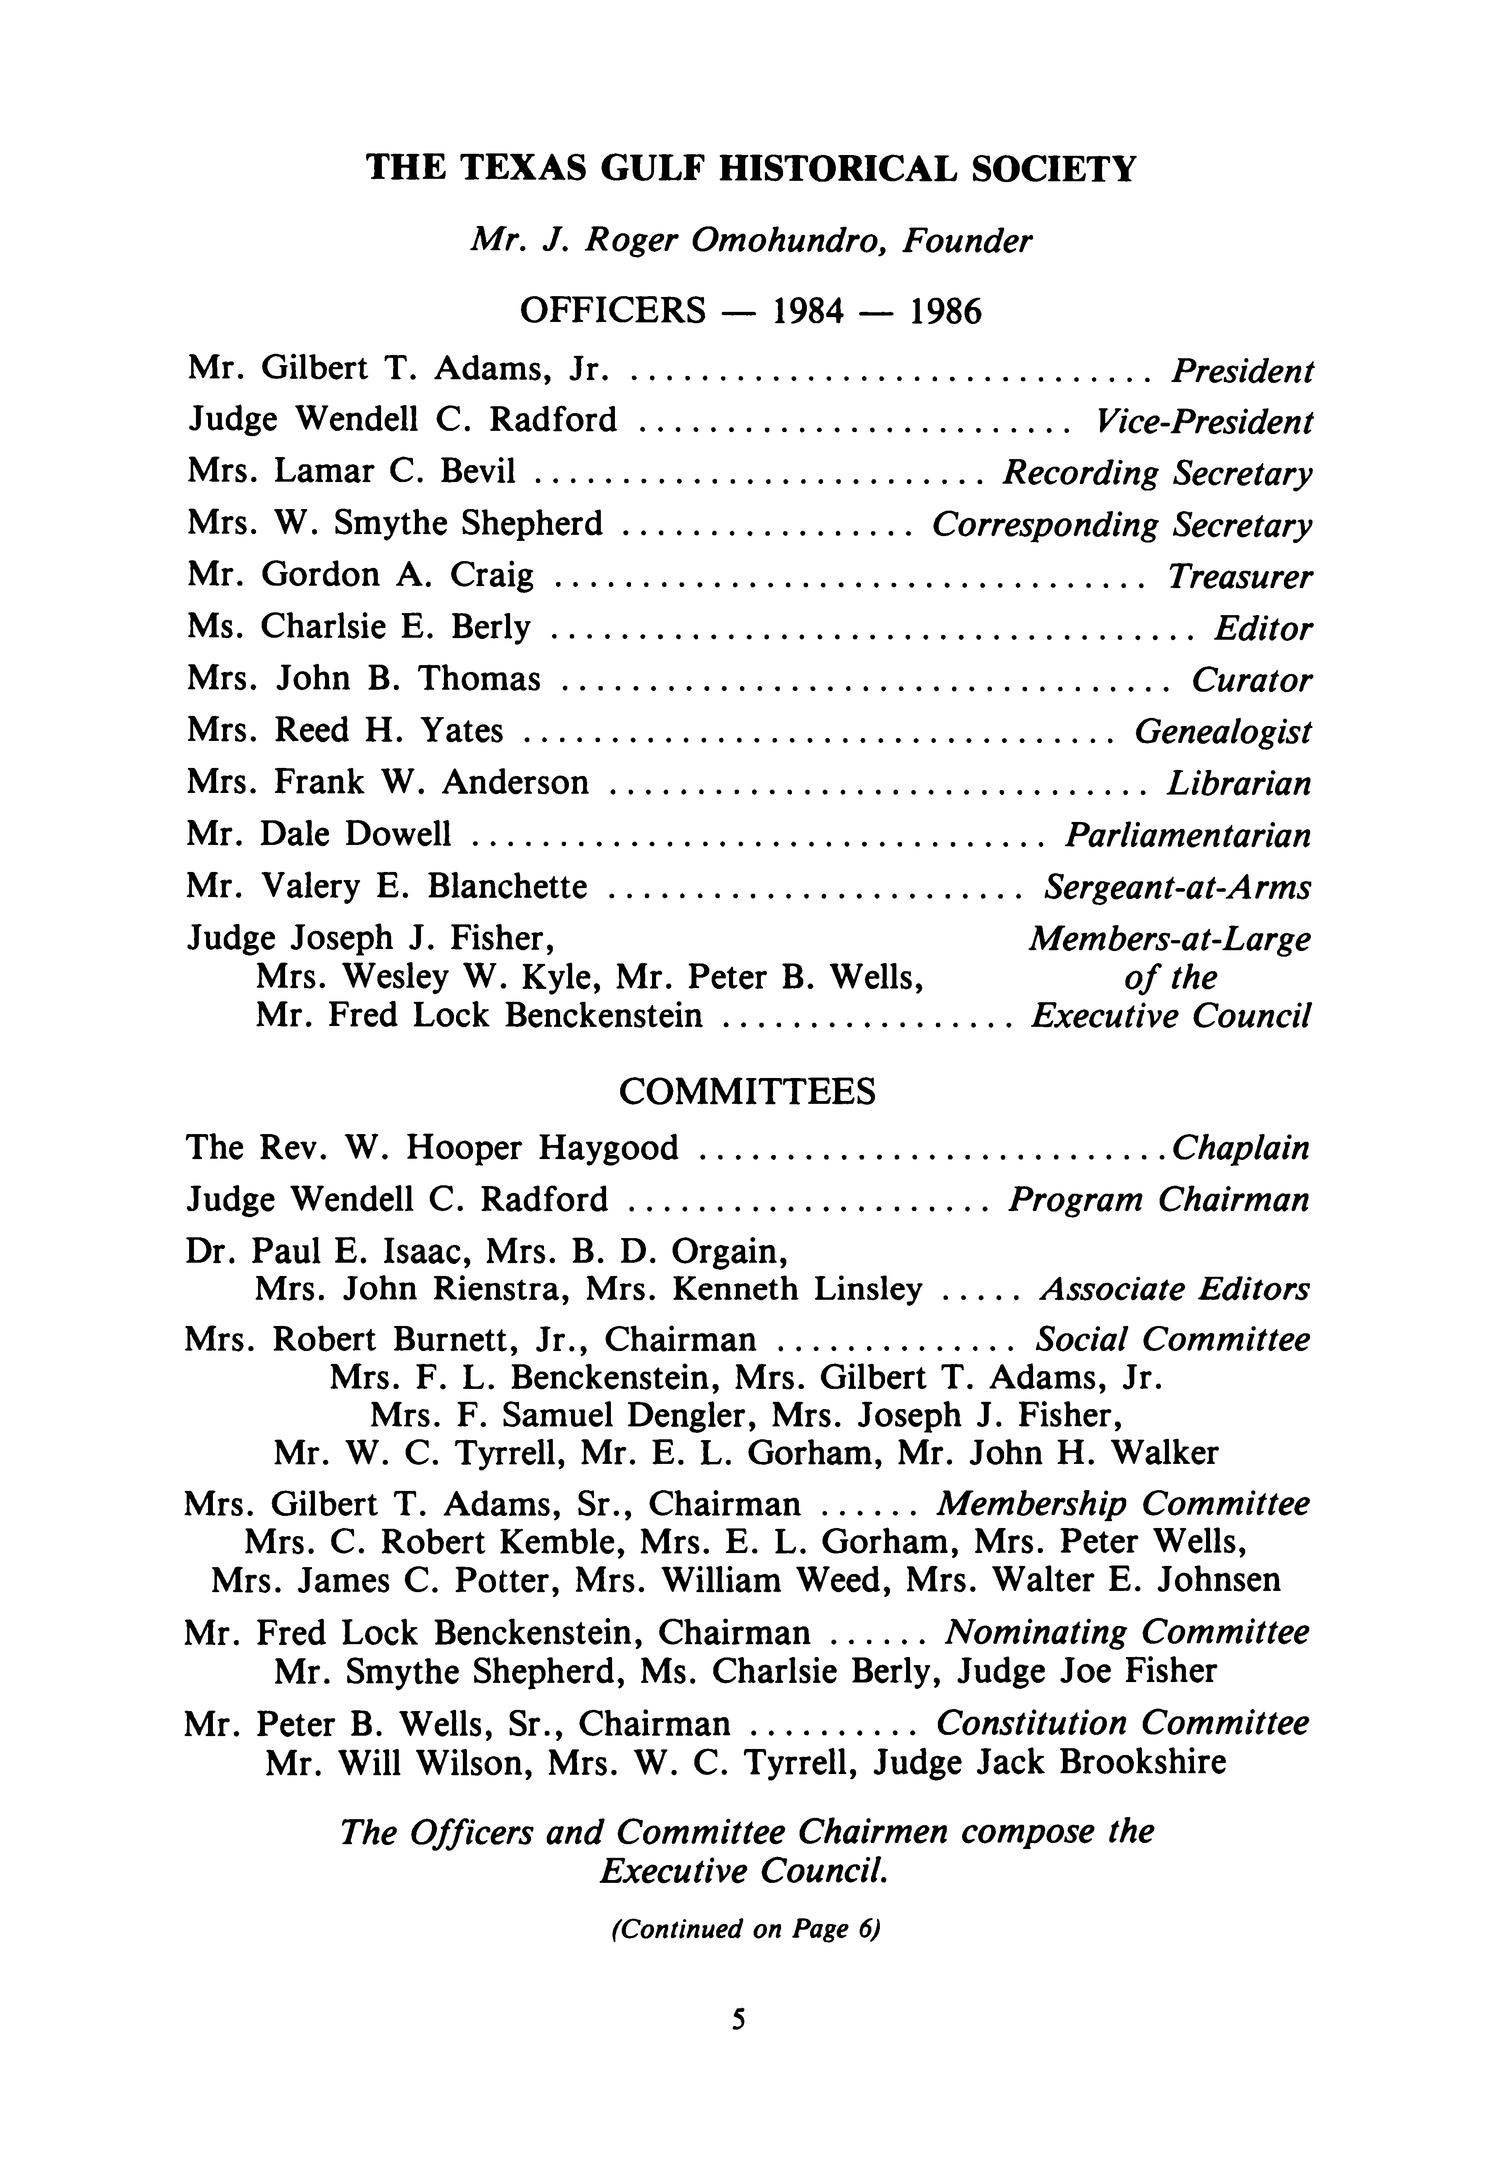 The Texas Gulf Historical and Biographical Record, Volume 21, Number 1, November 1985
                                                
                                                    5
                                                